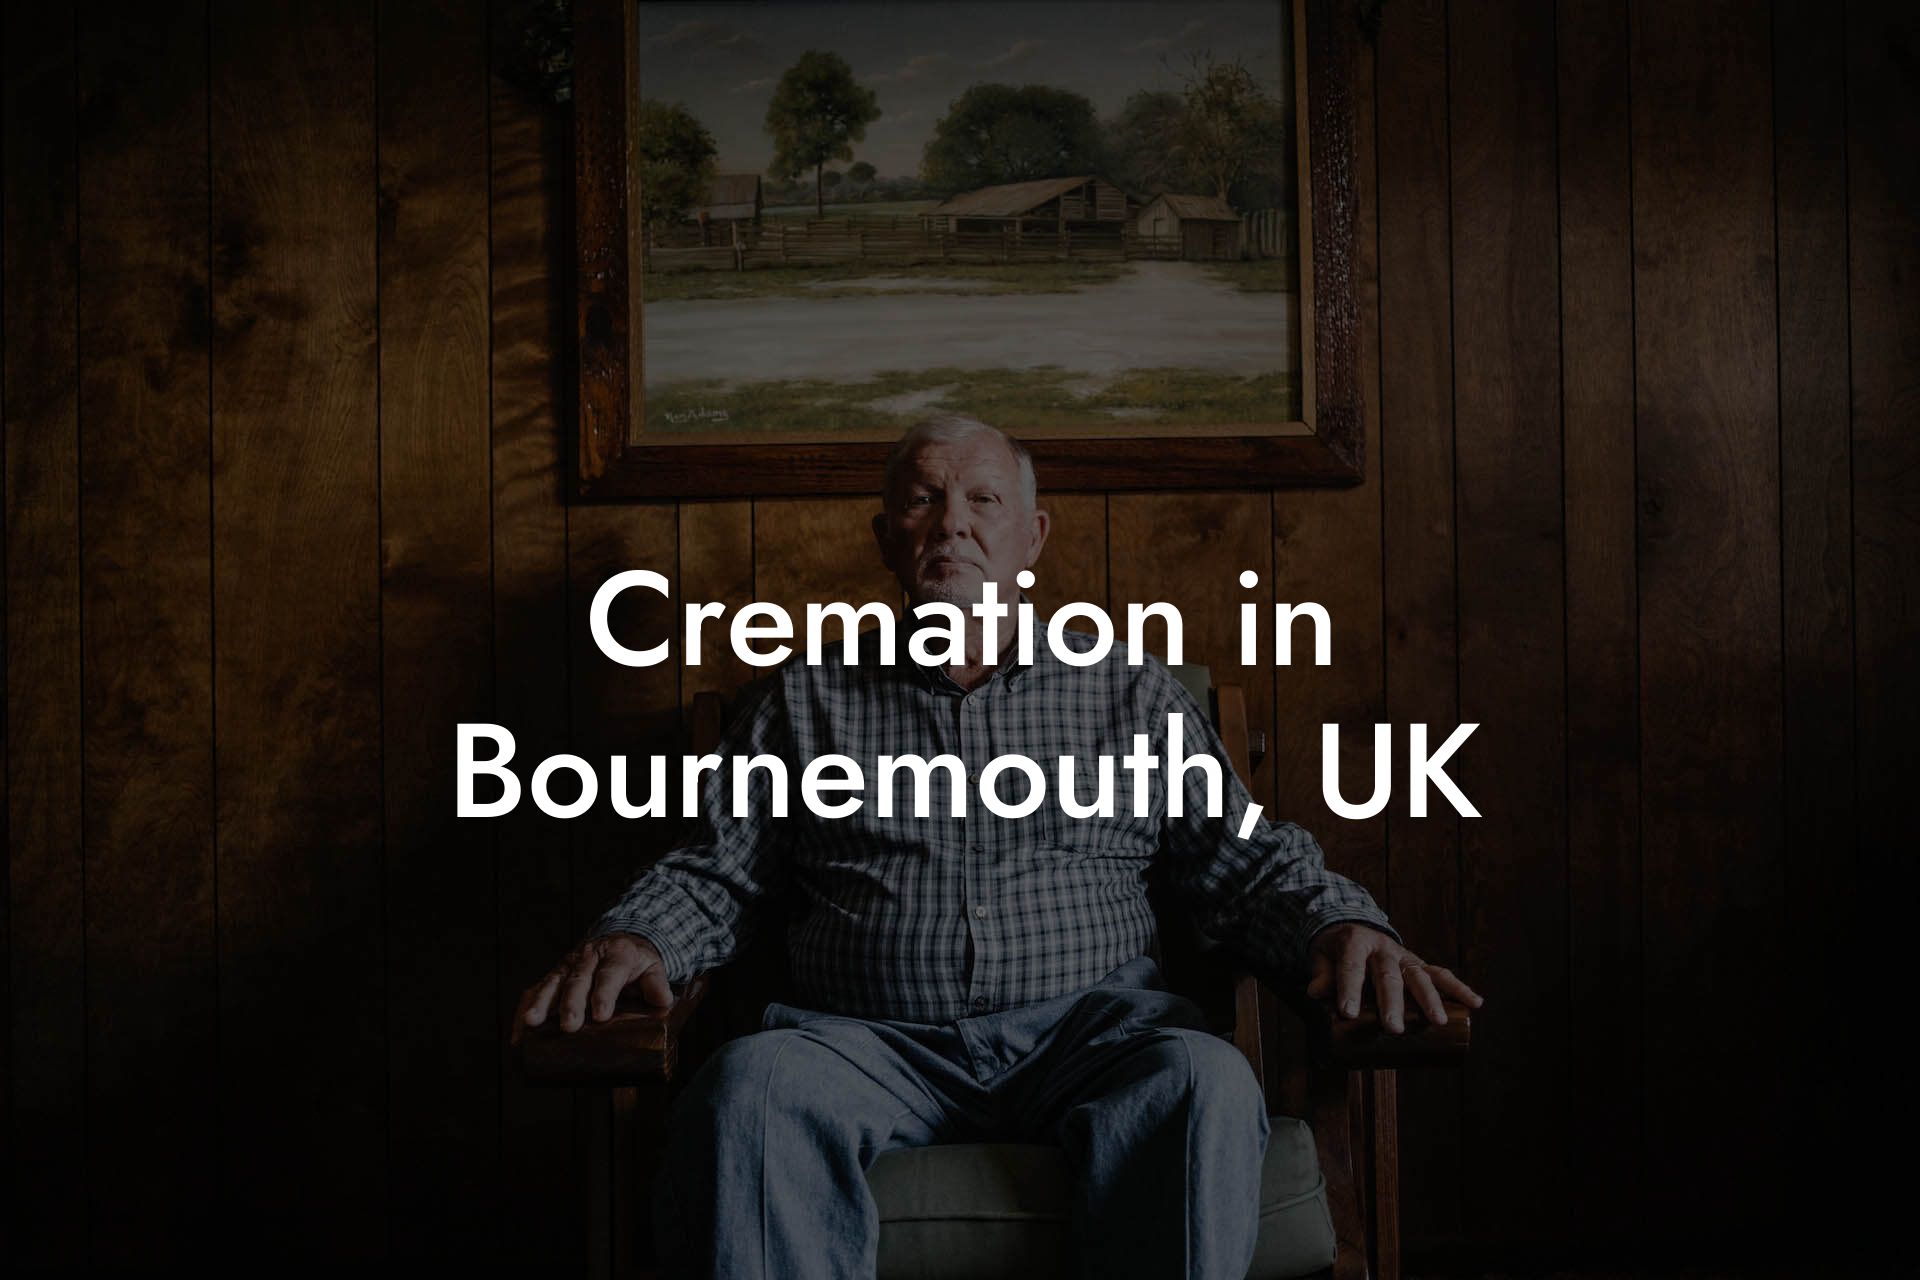 Cremation in Bournemouth, UK